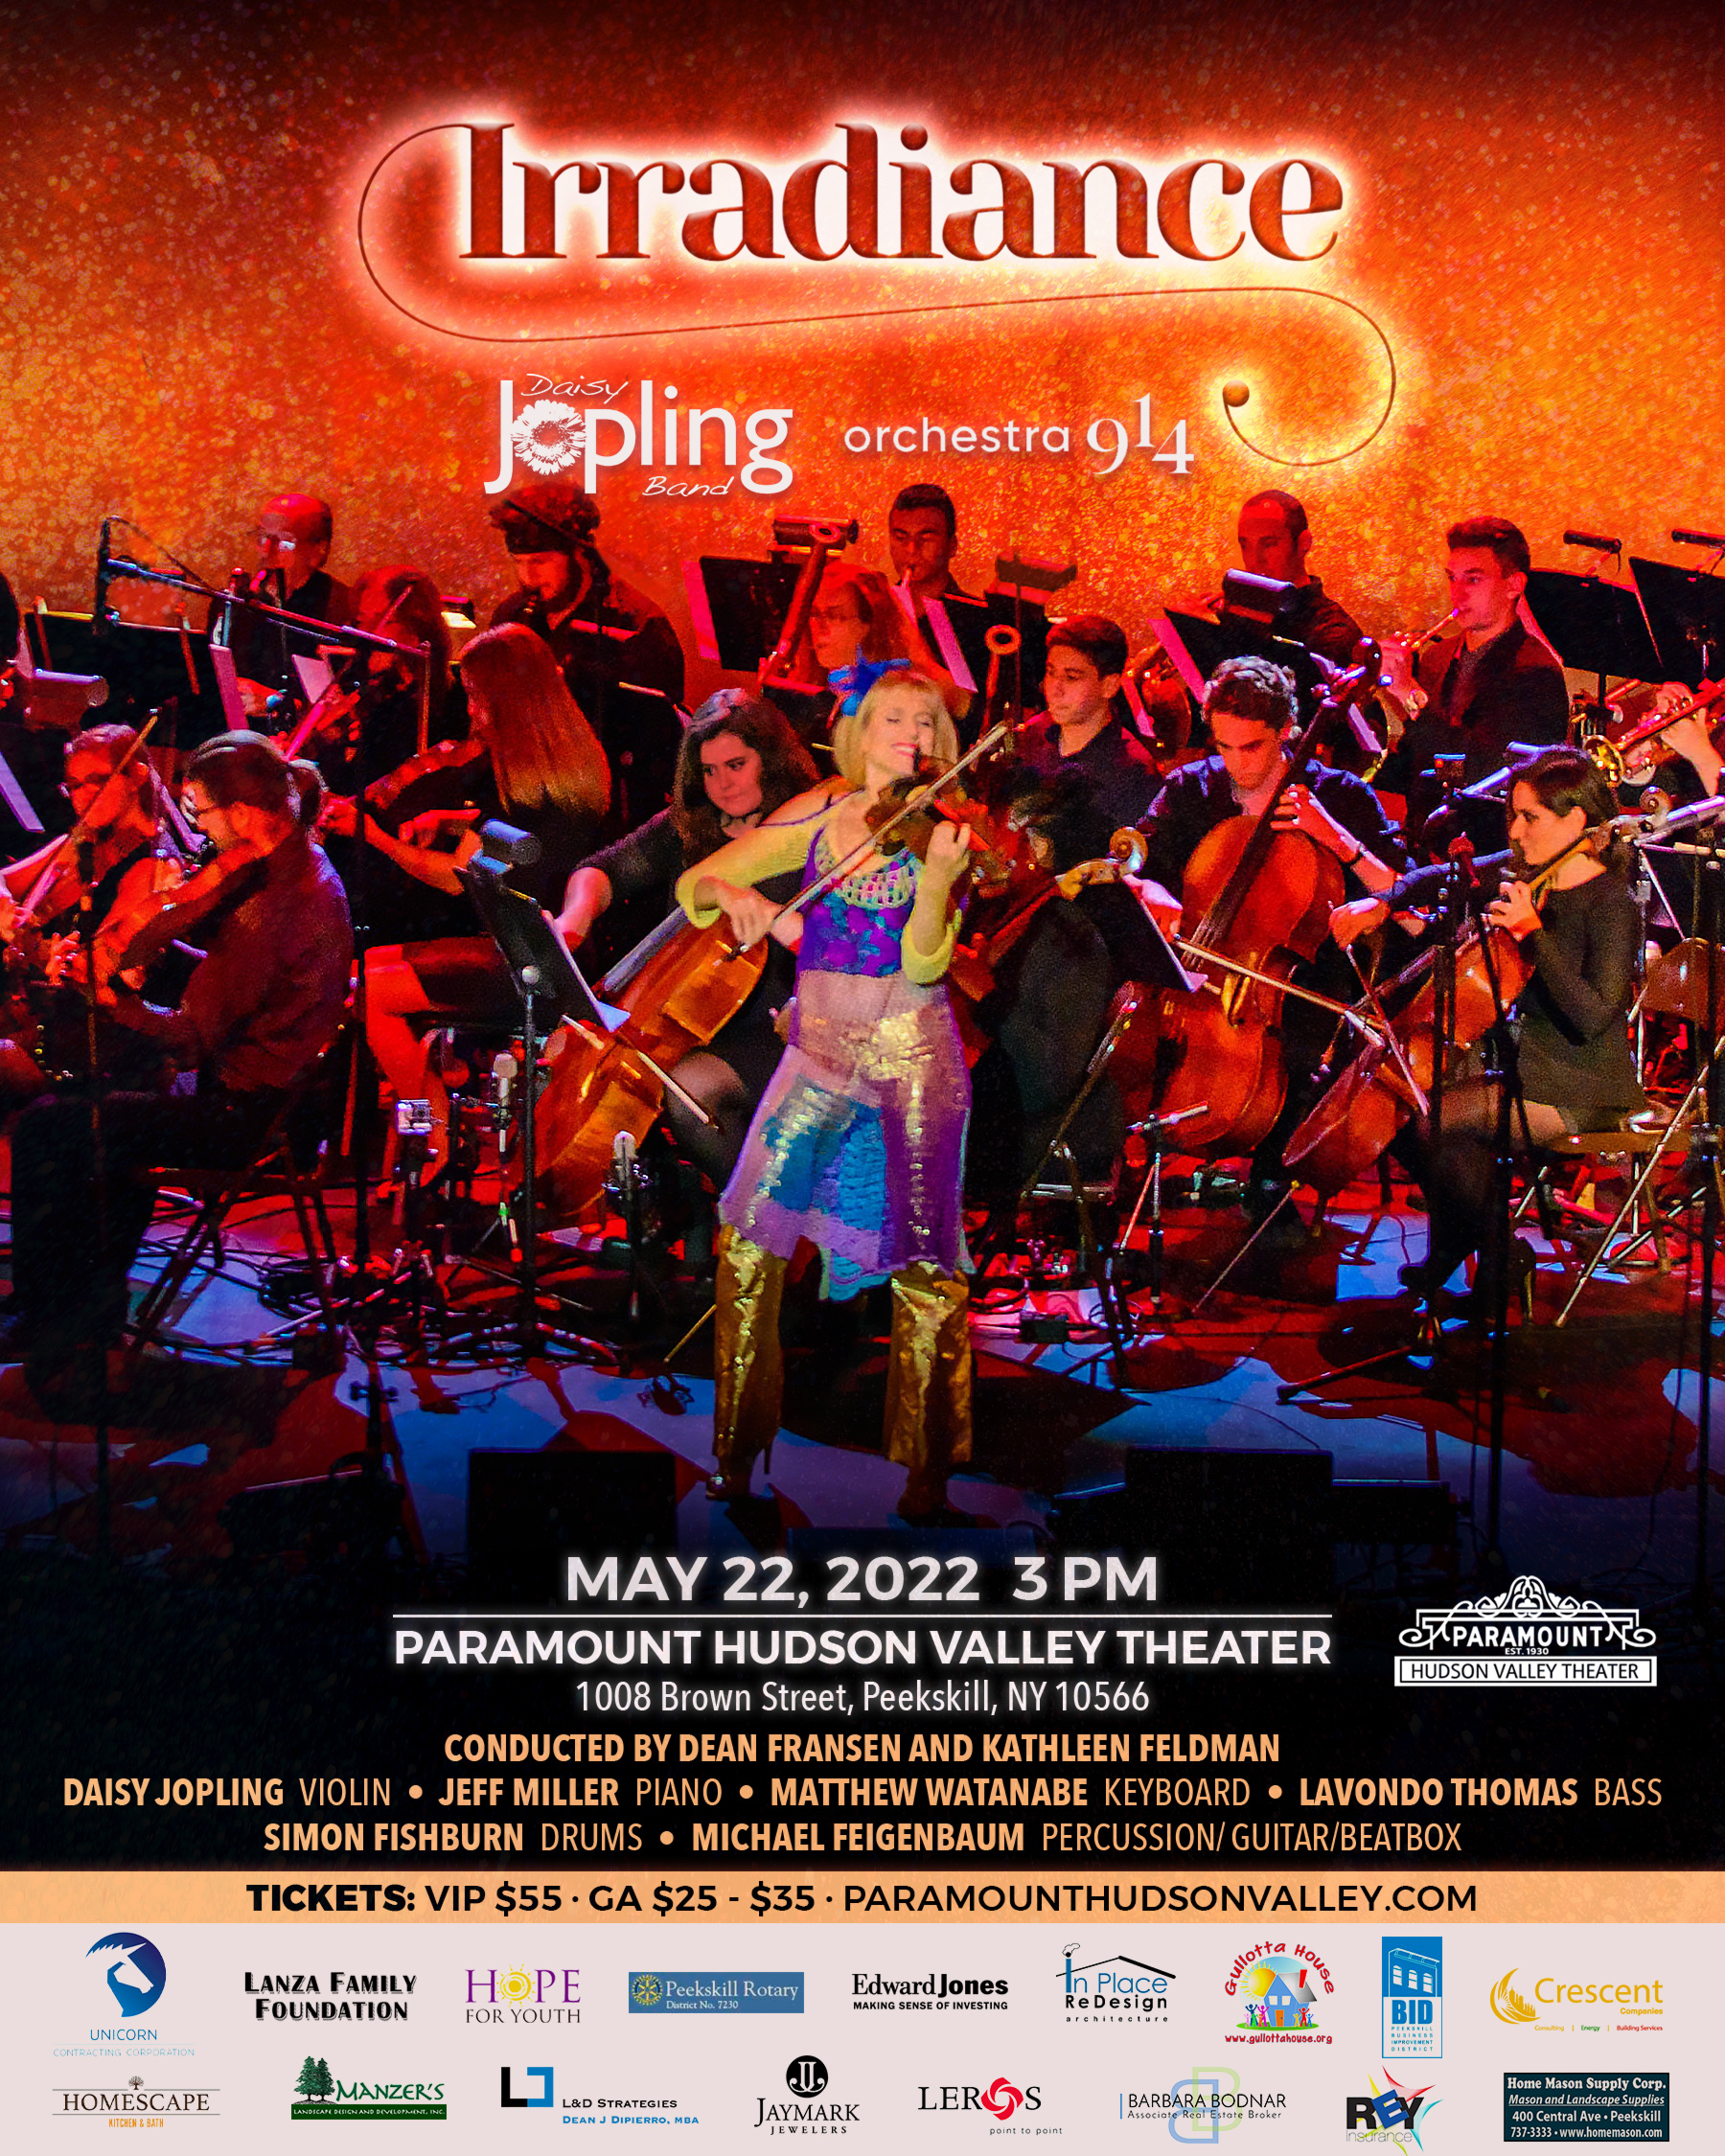 "Irradiance" At The Paramount Hudson Valley Theater In Peekskill, NY Sunday May 22nd, 2022 3 PM ET presented by the Daisy Jopling Music Mentorship Foundation